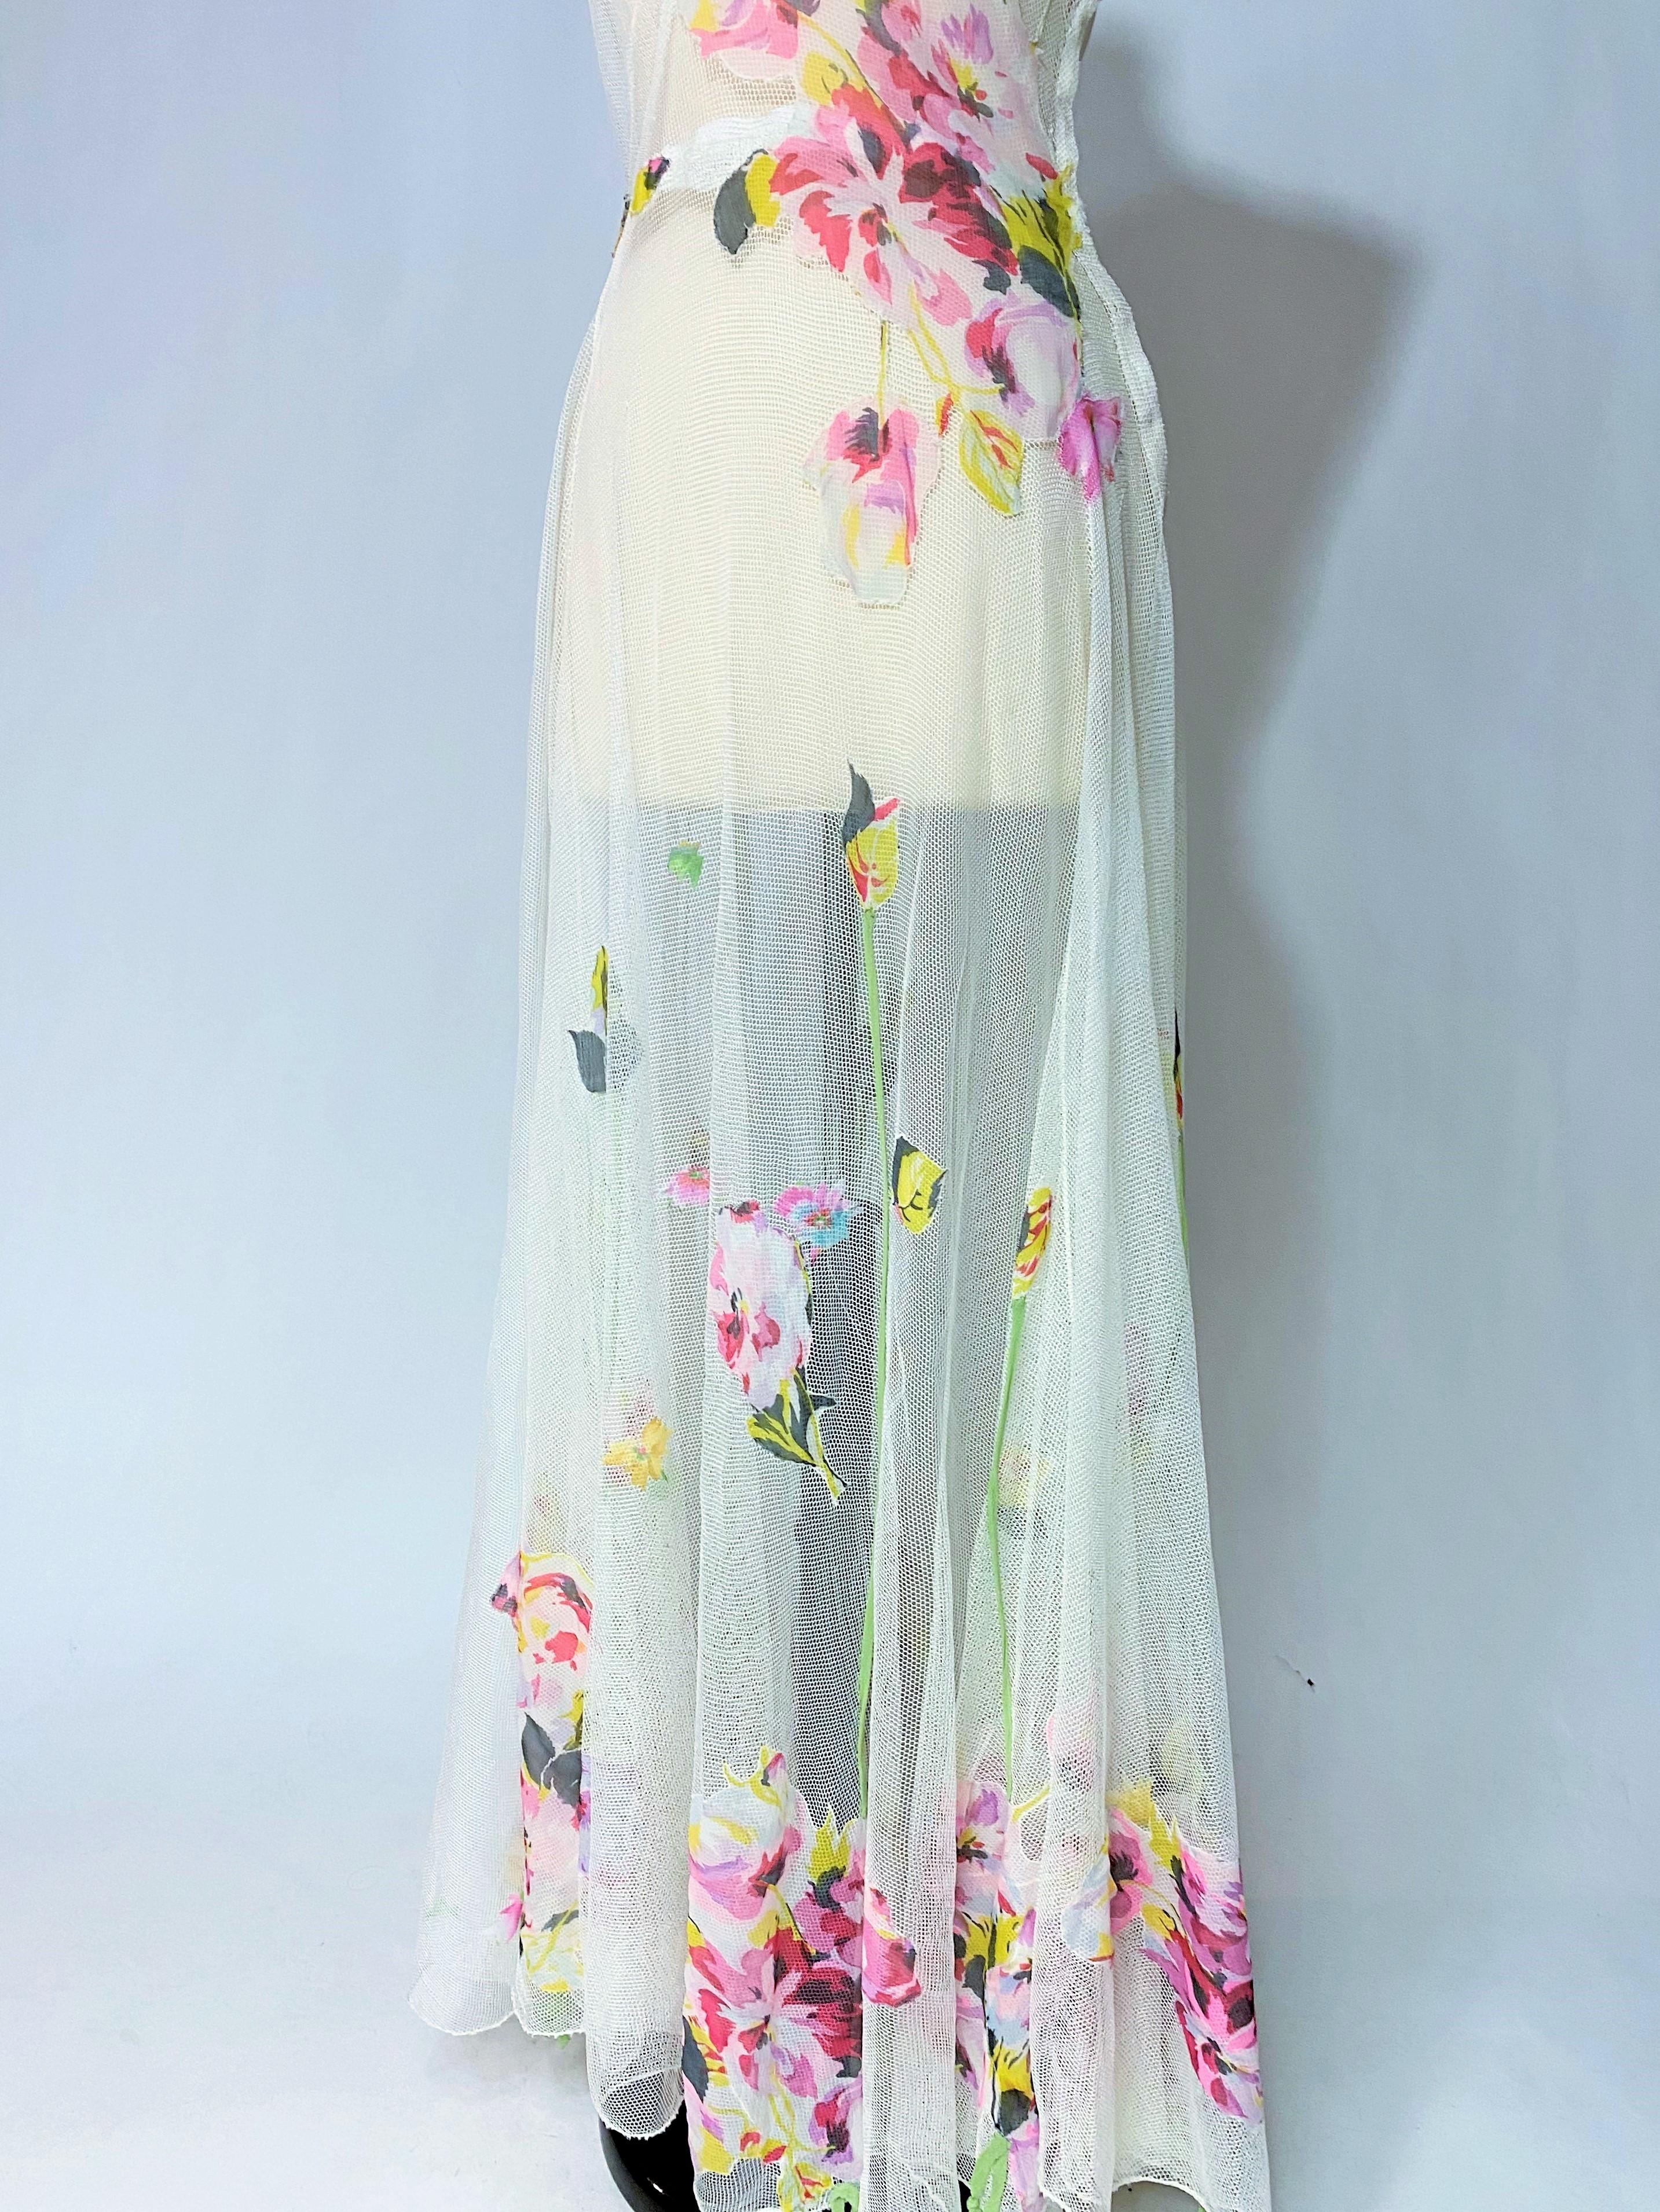 A Romantic Dress in white cotton Net applied with printed Chiffon Circa 1938 For Sale 4